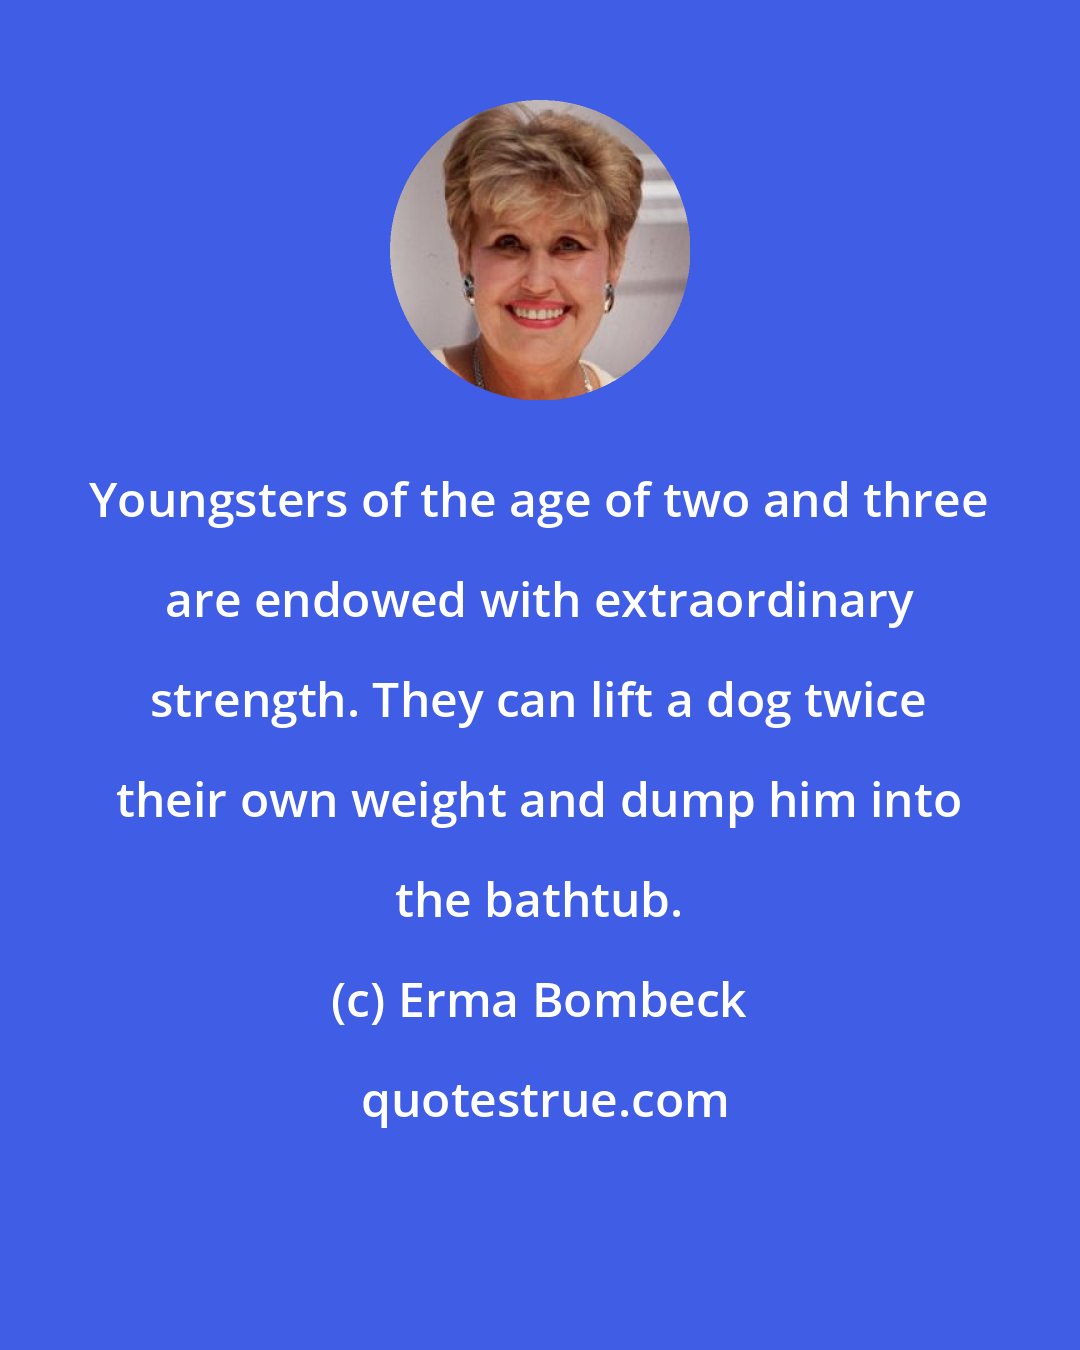 Erma Bombeck: Youngsters of the age of two and three are endowed with extraordinary strength. They can lift a dog twice their own weight and dump him into the bathtub.